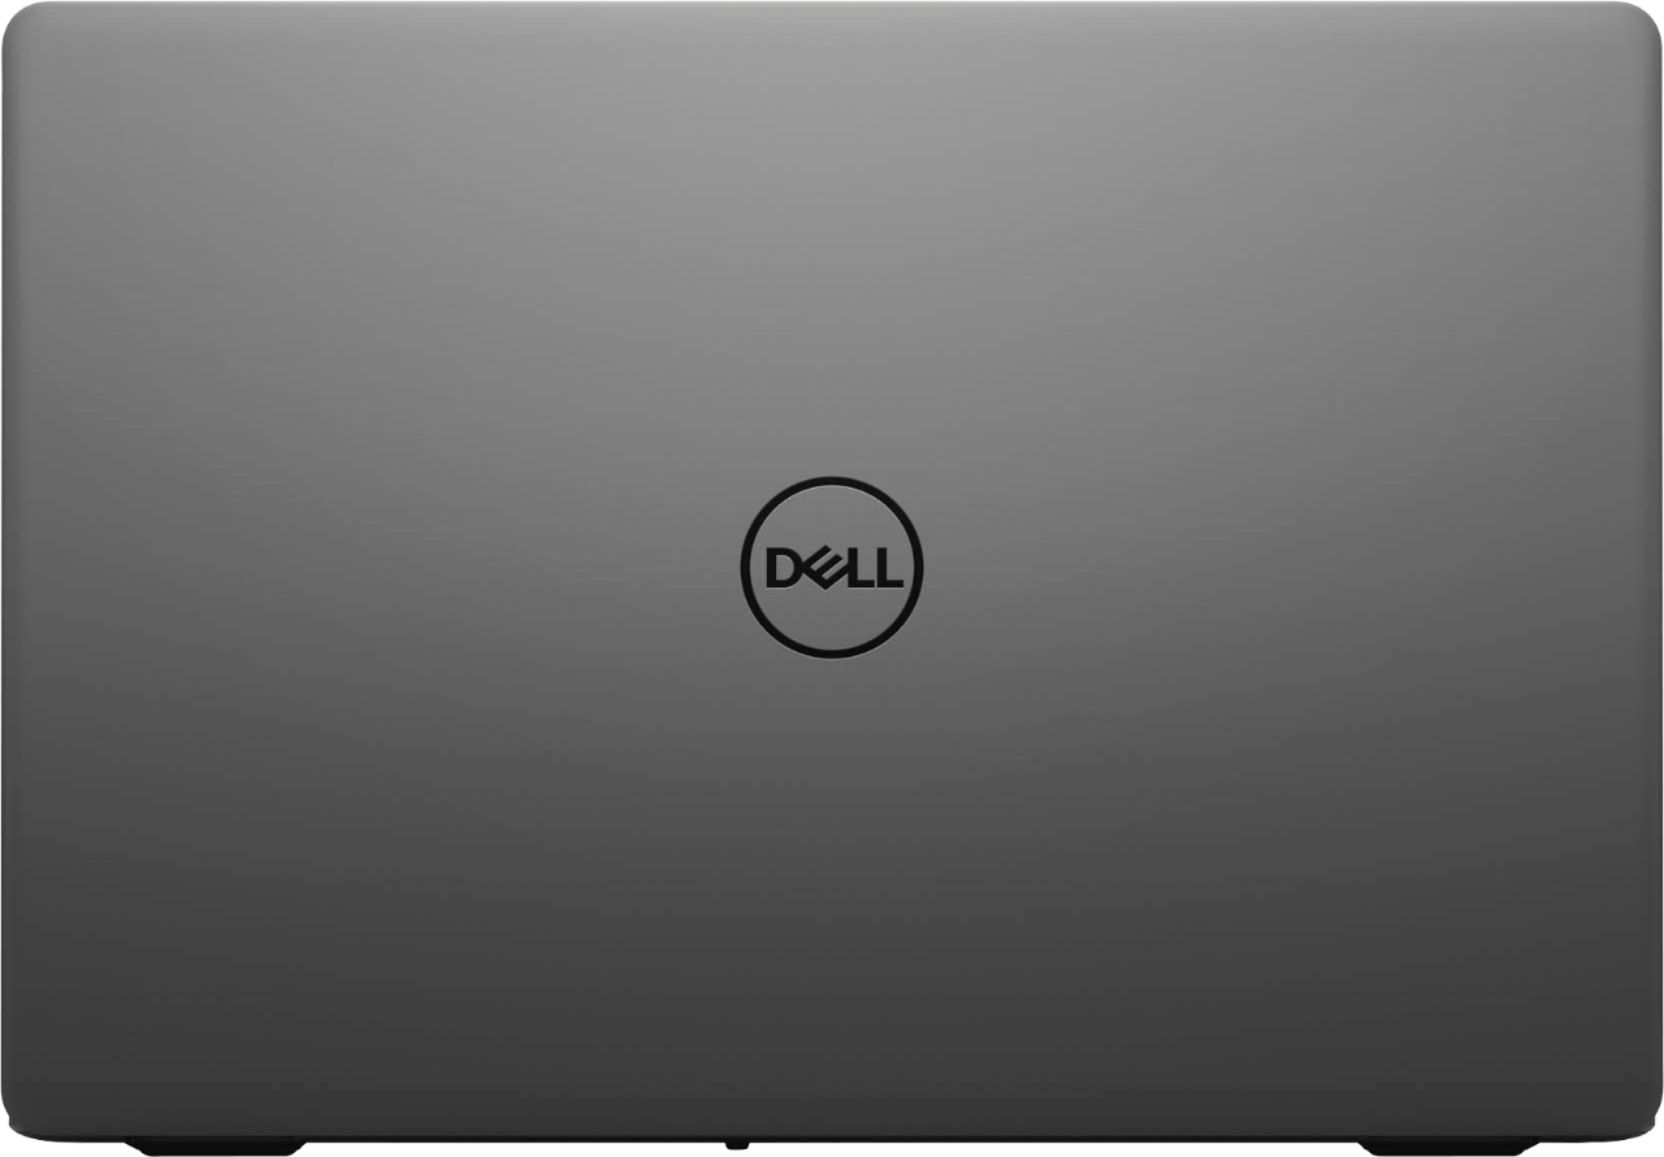 Dell - Inspiron 15.6" FHD Touch Laptop -Intel Core i5-1035G1 - 8GB RAM - 256 GB SSD - Black - image 4 of 7